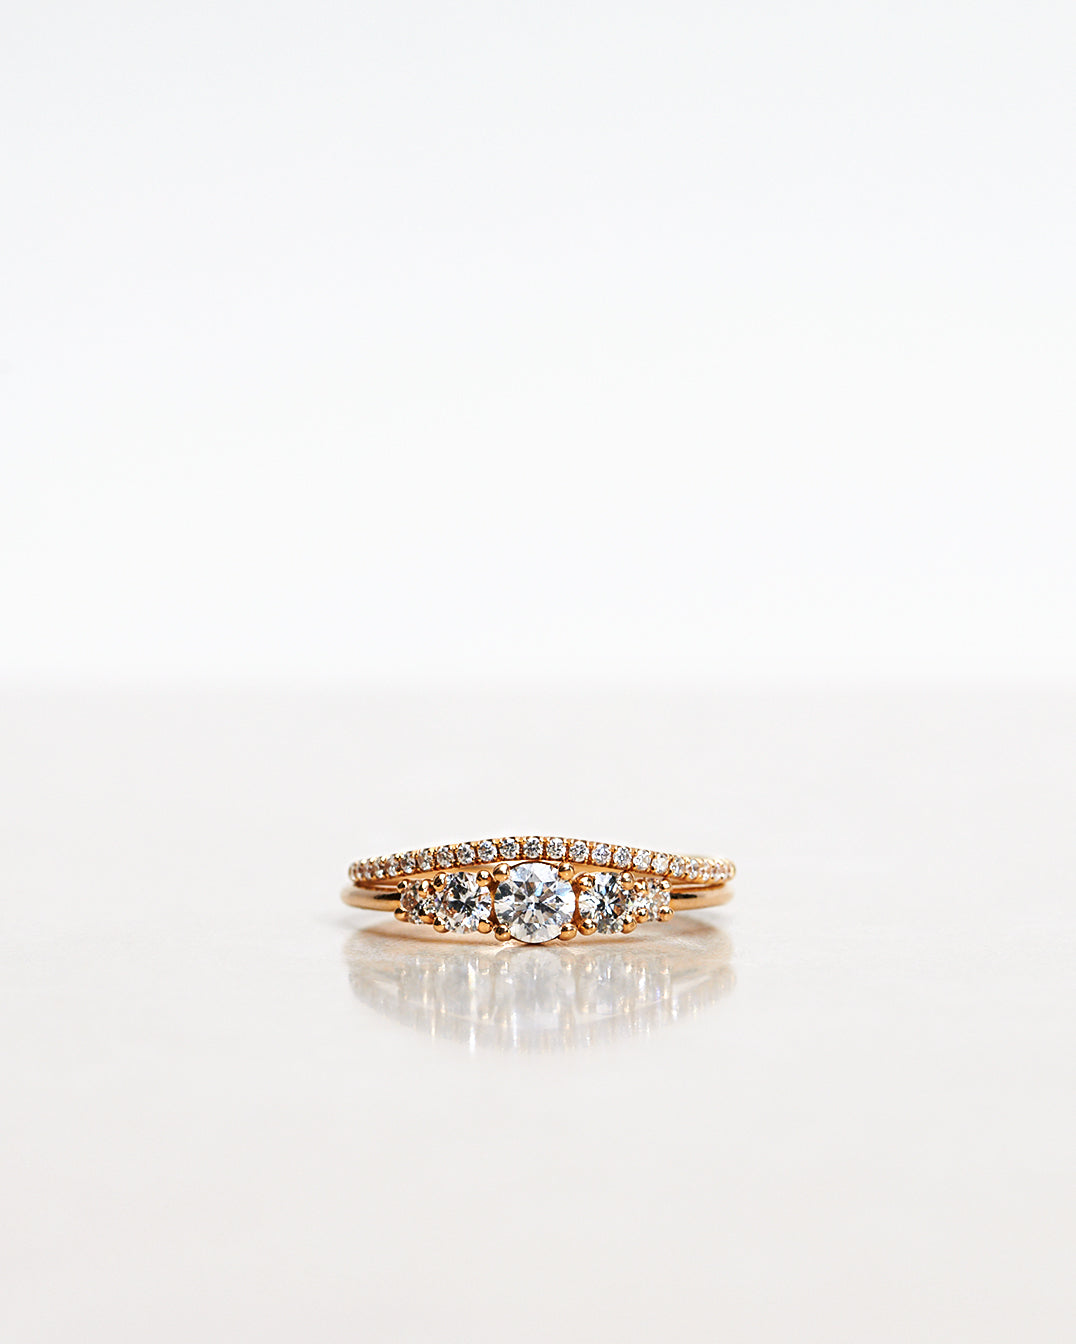 Ring stack with two Mumbaistockholm Fine Jewelry Rings:  Elise Ring in 18K yellow gold with five white, conflict-free diamonds and Jade Petite Wave Half Ring with a curved band half covered with 0.005 CT diamonds TWVS.